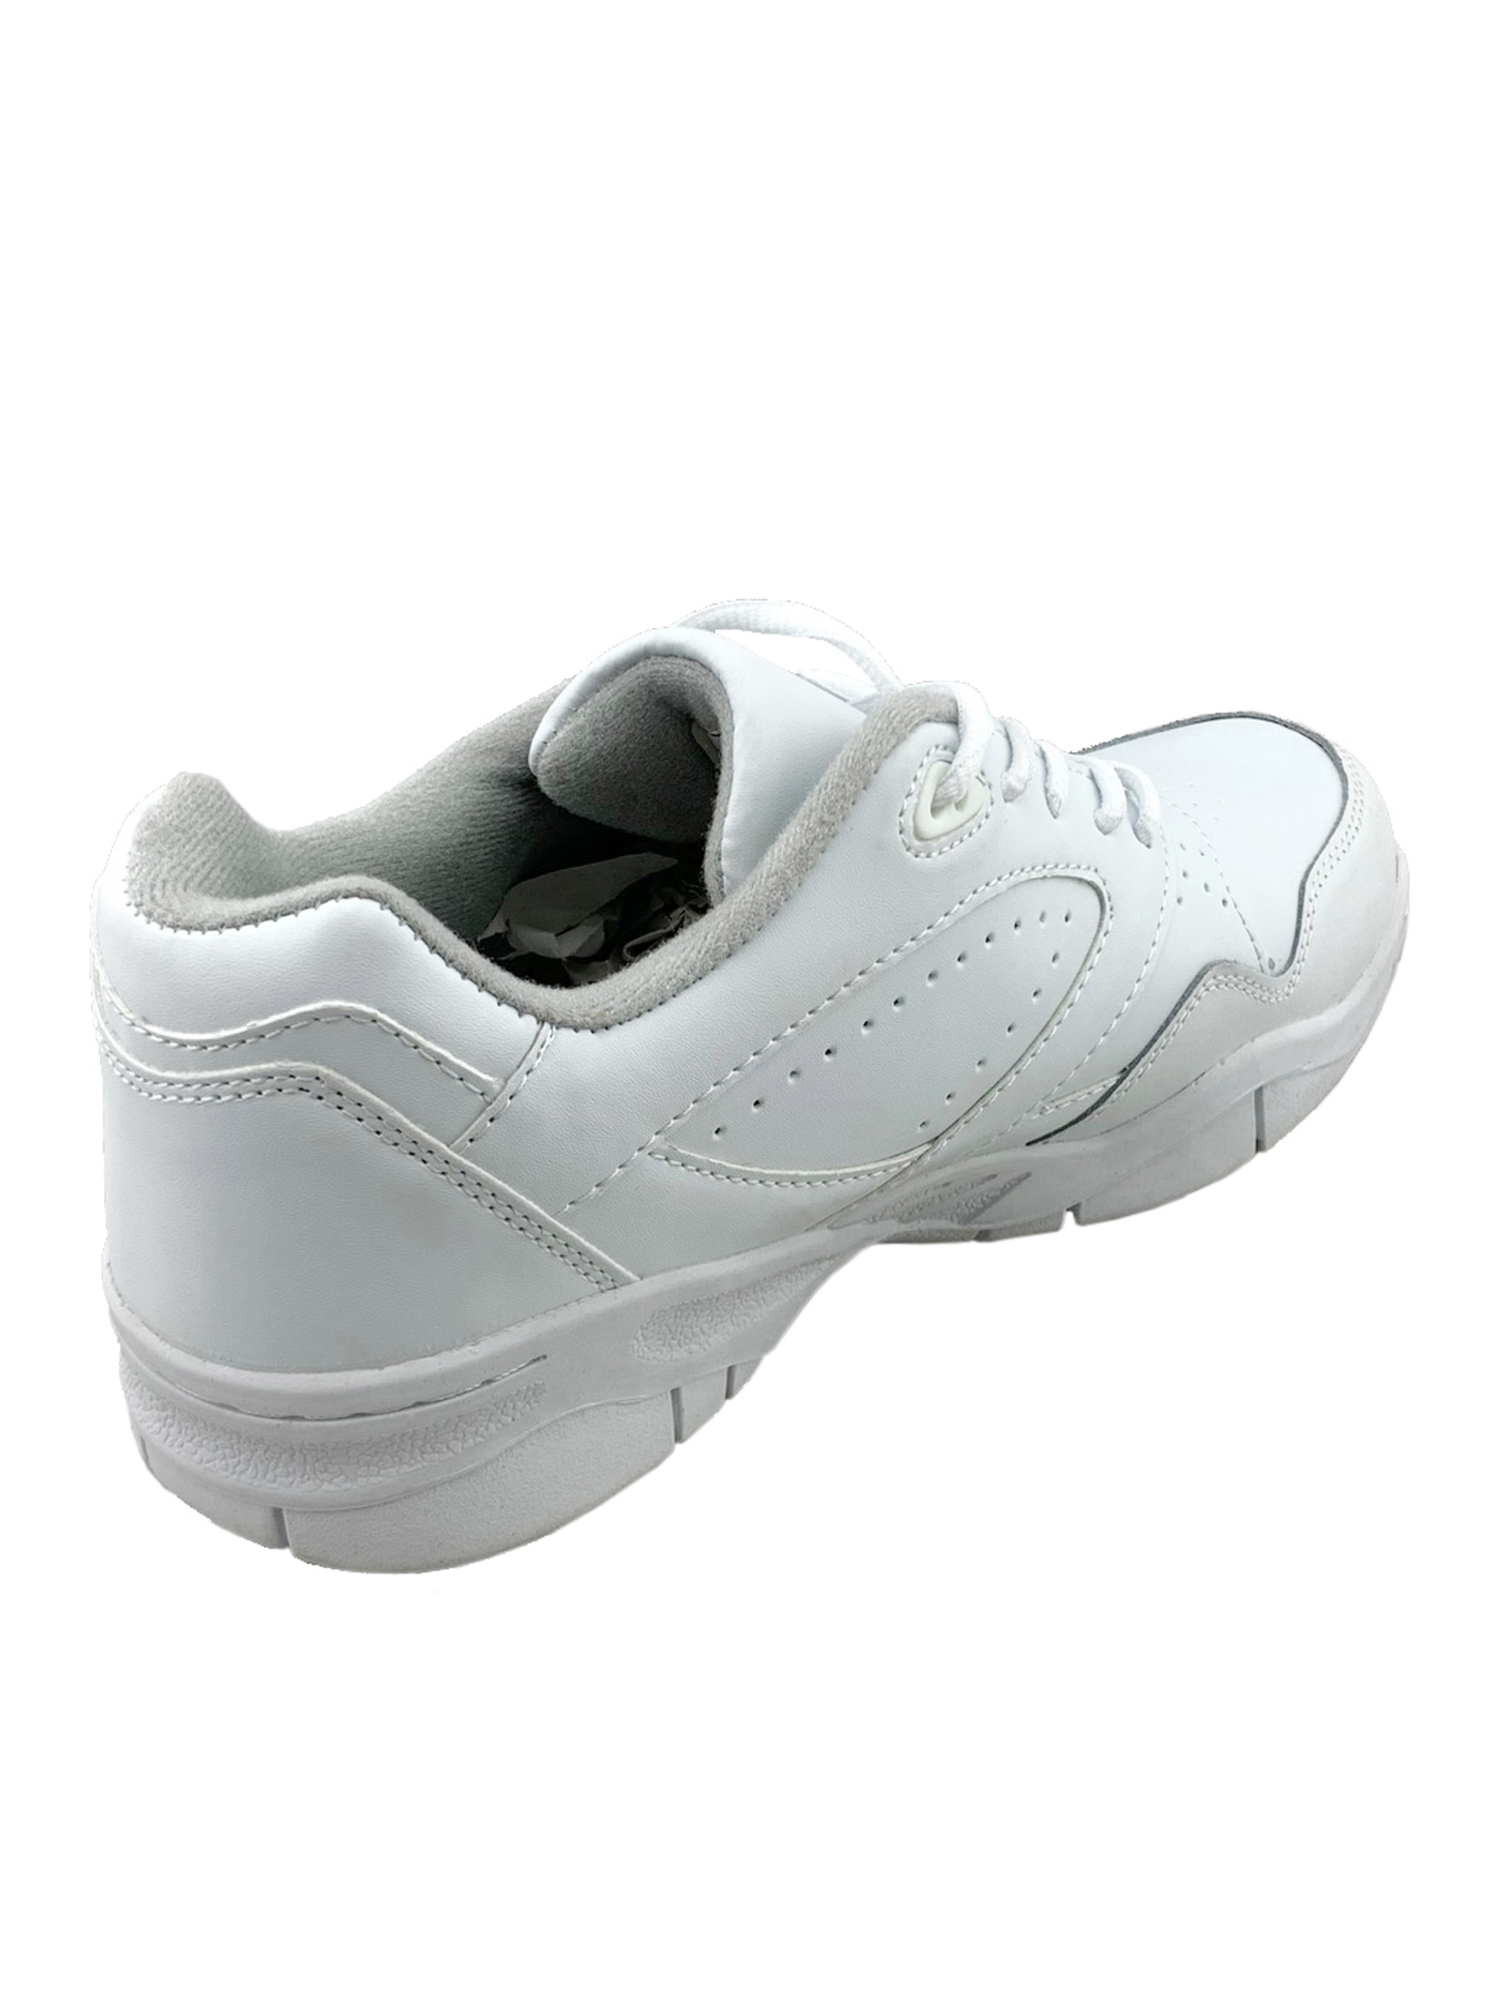 Tanleewa Men's Leather White Sports Shoes Lightweight Sneakers Breathable Casual Shoe Size 12 - image 5 of 5